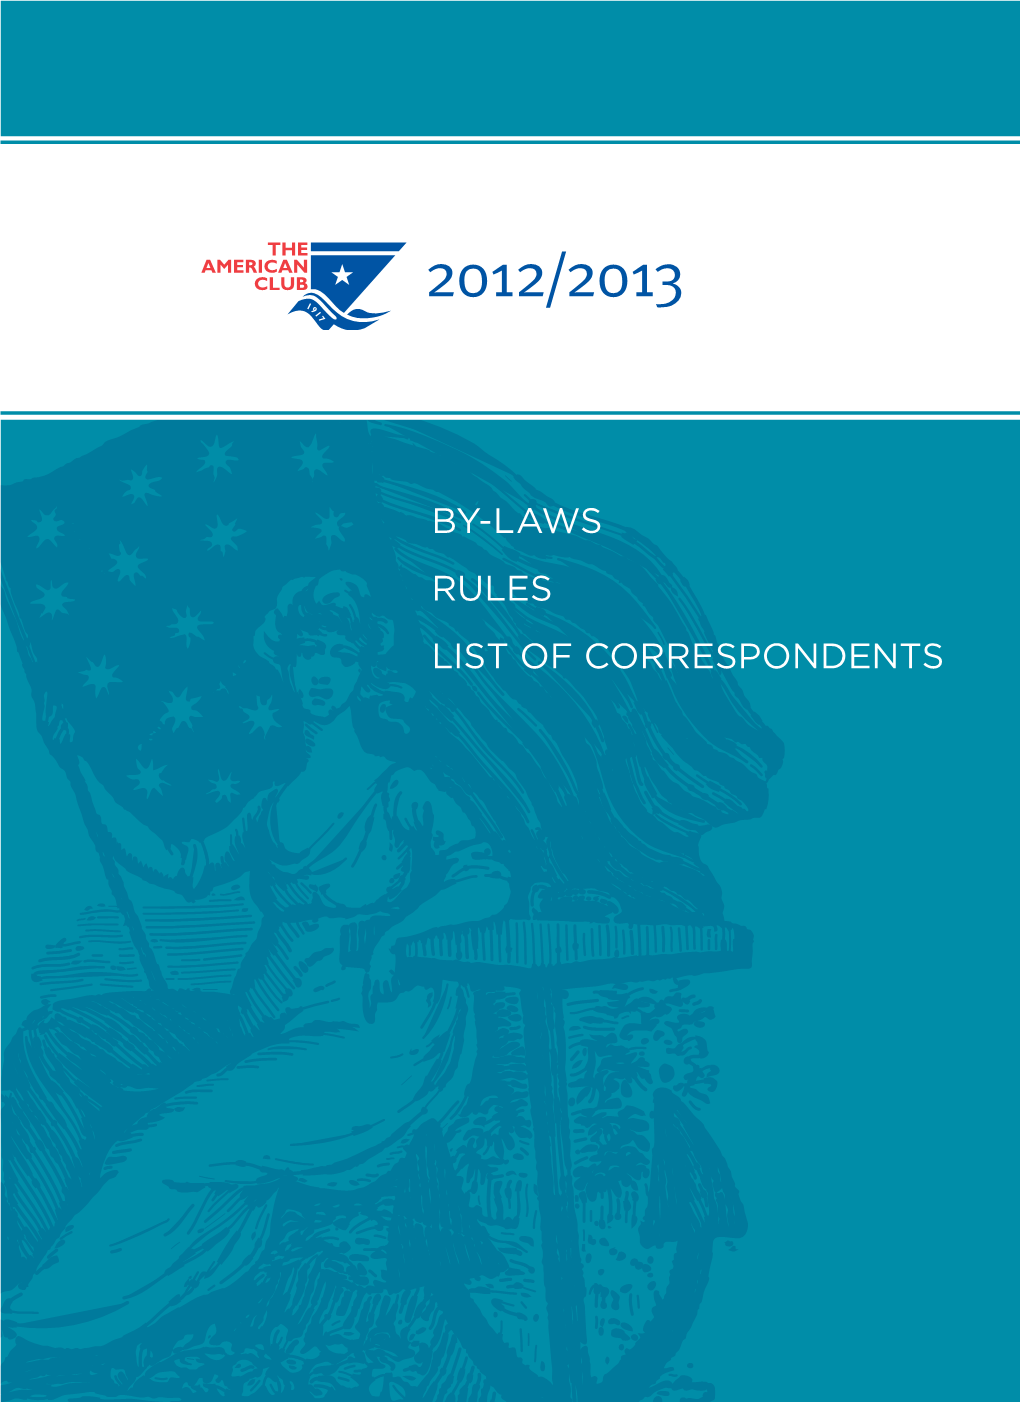 2012/13 By-Laws, Rules & List of Correspondents (PDF)